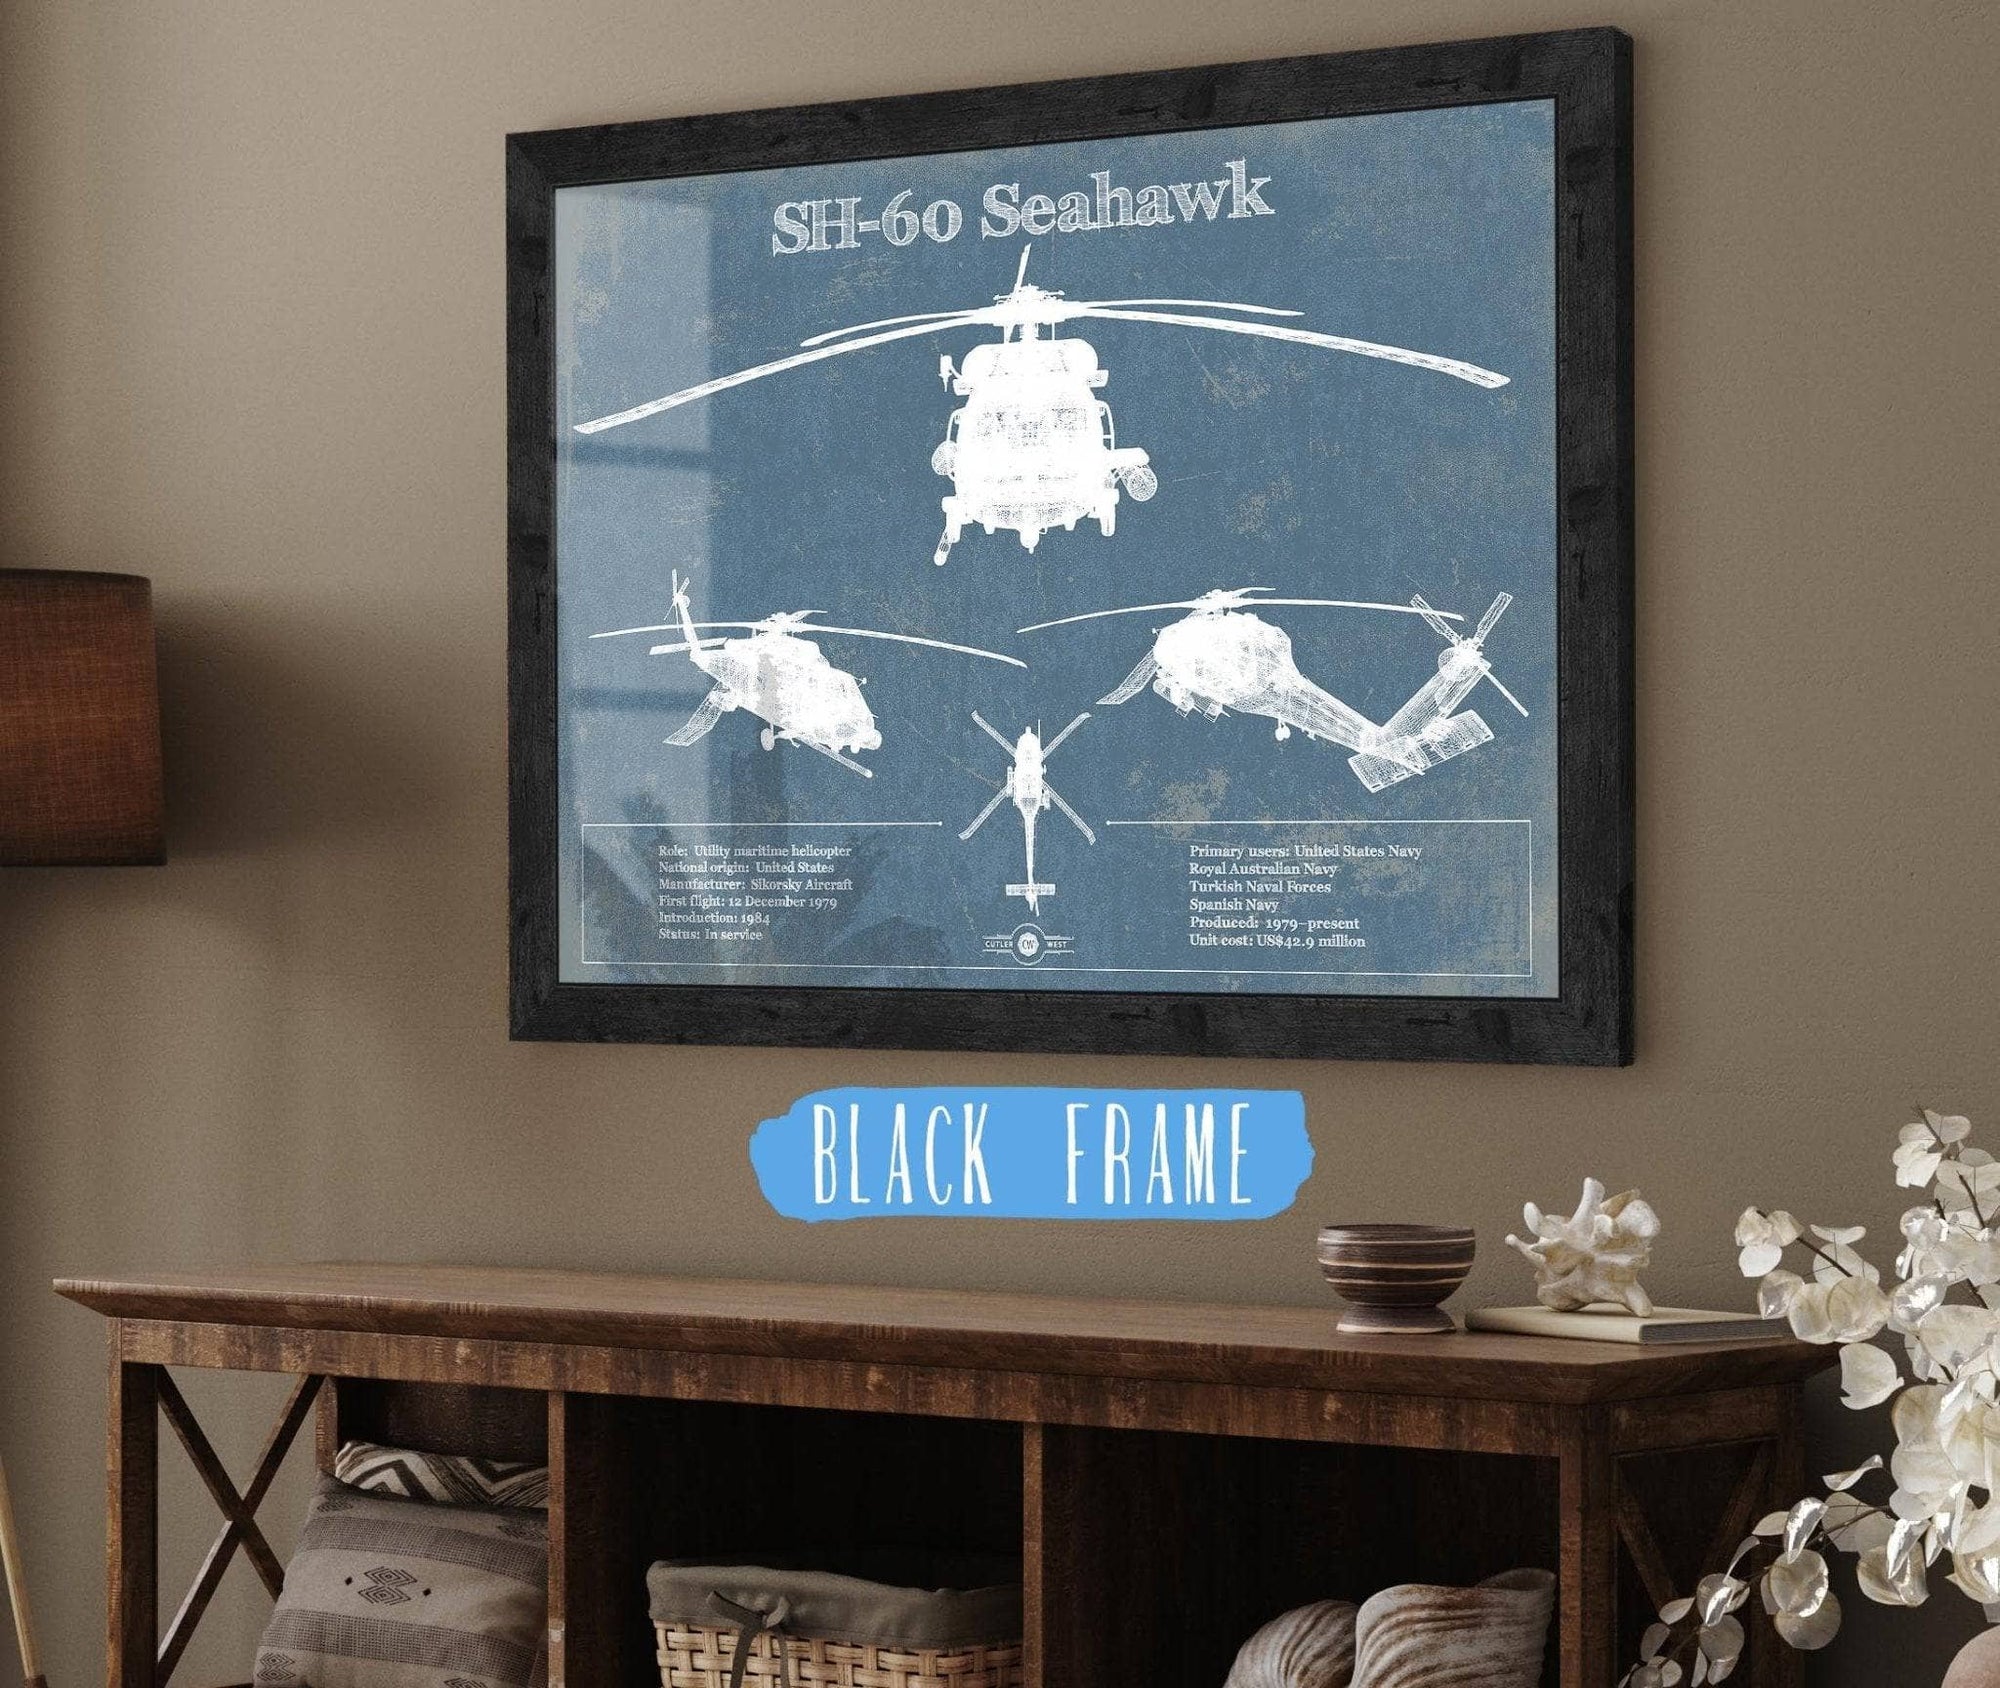 Cutler West Military Aircraft 14" x 11" / Black Frame SH-60/MH-60 Seahawk Helicopter Vintage Aviation Blueprint Military Print 833447904_25061